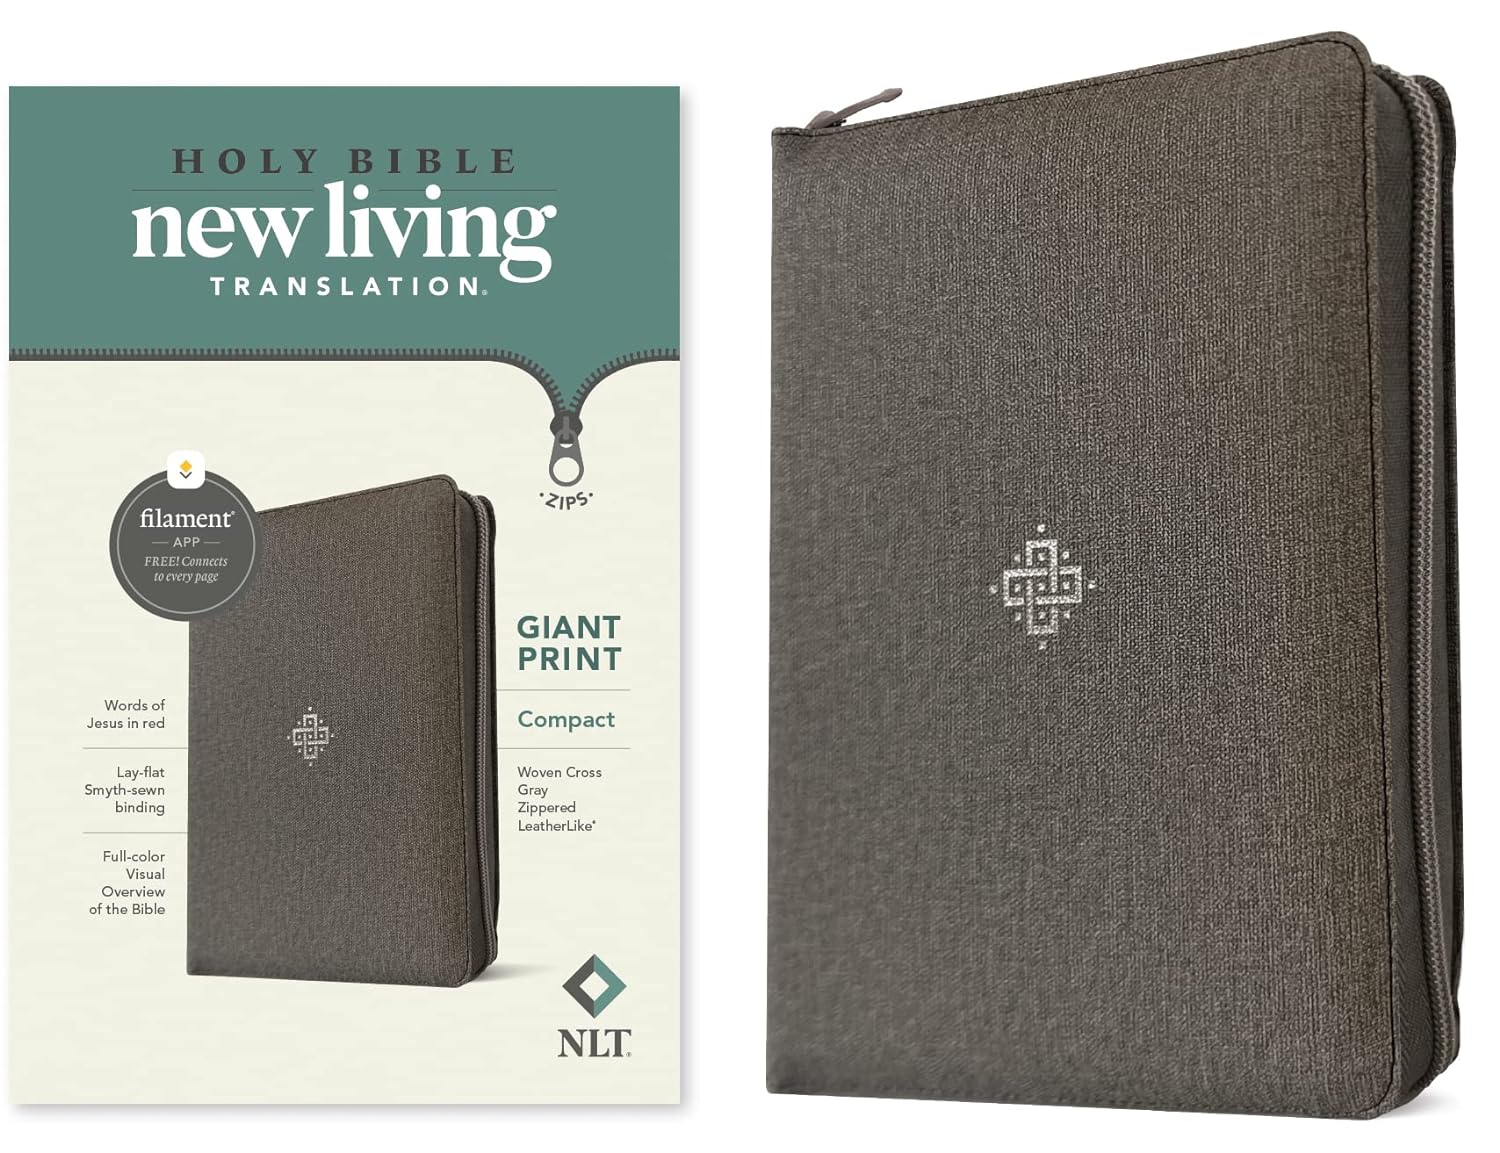 NLT Compact Giant Print Zipper Bible, LeatherLike, Woven Cross Gray, Red Letter (Filament-Enabled)